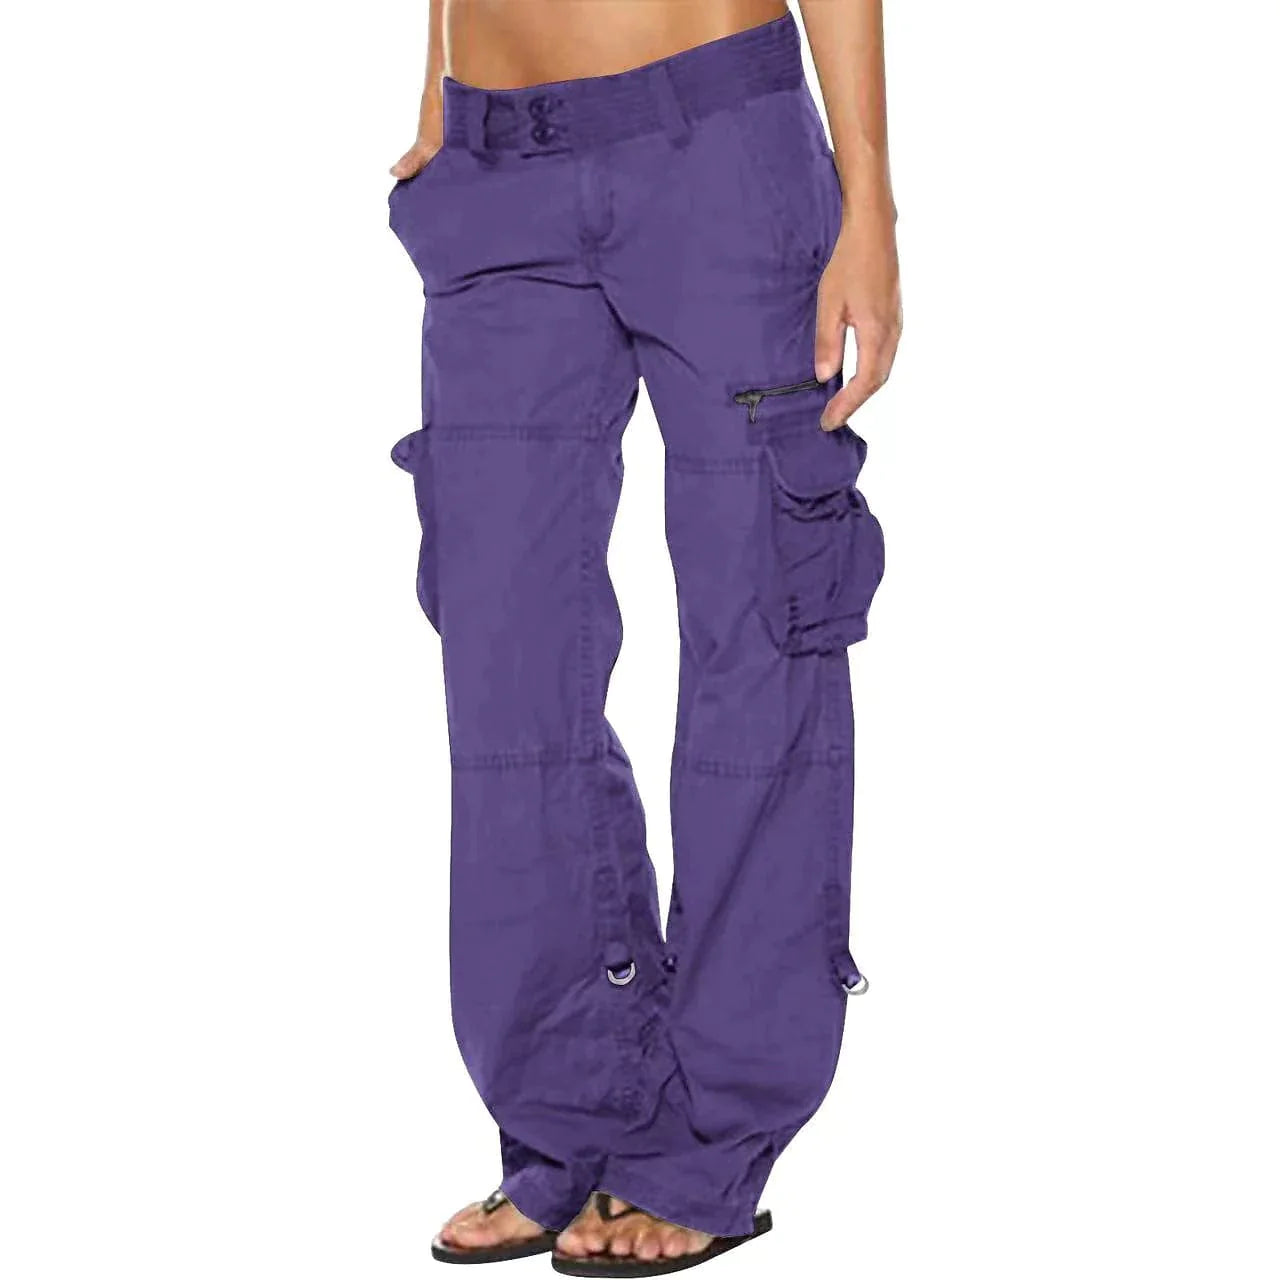 Versatile and Comfortable Women's Cotton Cargo Pants - Perfect for Everyday Wear